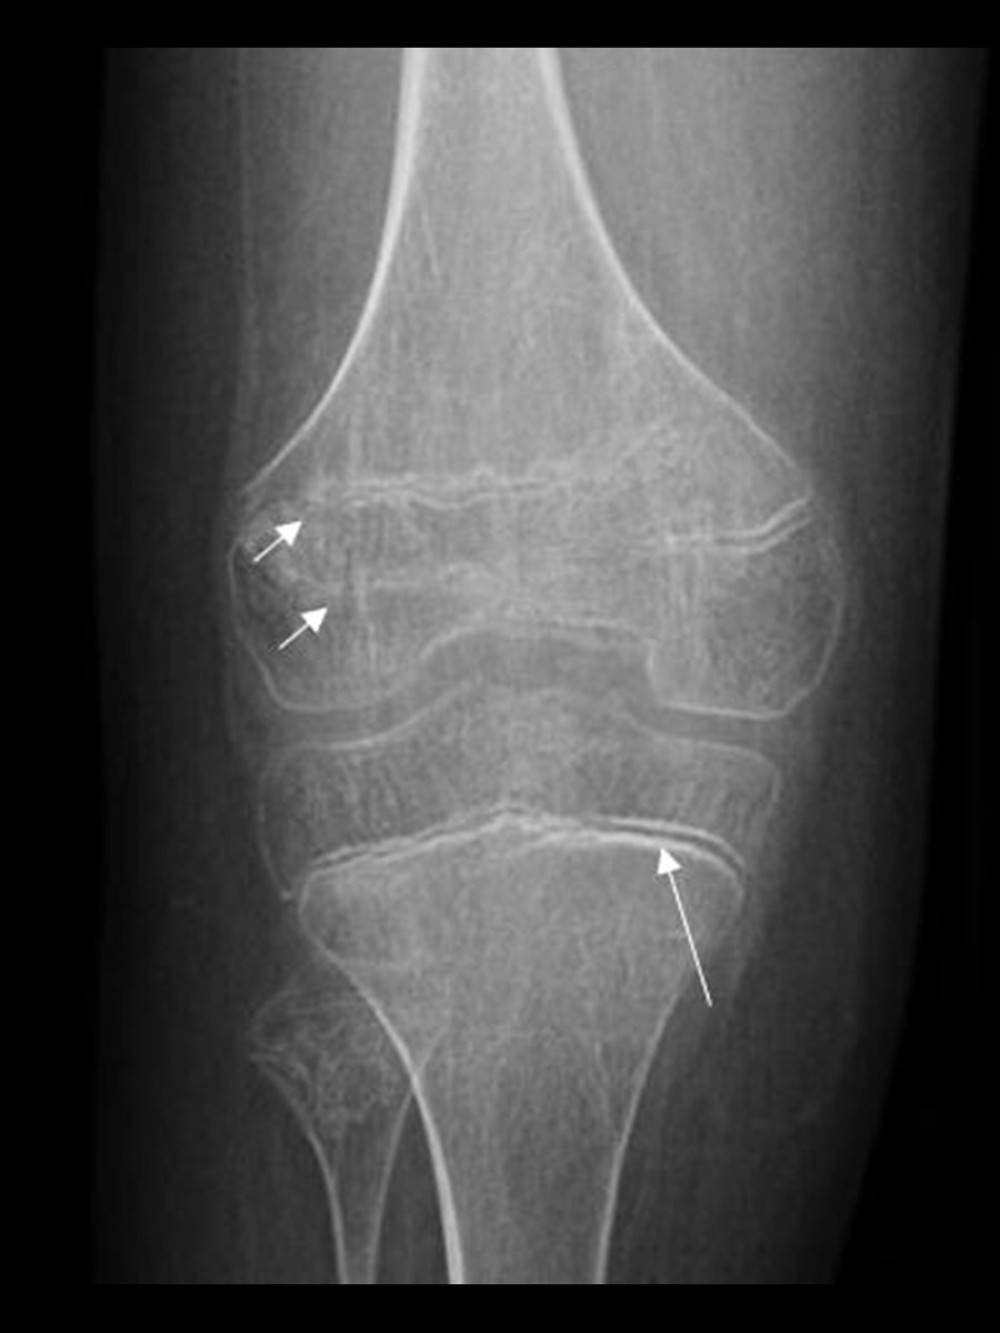 Anterior-posterior right knee radiograph demonstrating diffuse osteopenia. There is increased density at the zone of provisional calcification compatible with a Frankel’s line as seen in scurvy (thin arrow) [4]. The distal femoral growth plate is distorted and irregular, producing doubled appearance related to different heights of the posterior and anterior physis (short arrows). The patient is status post hardware removal. Plain films commonly show osteopenia, though this is nonspecific [4,9], as well as thin cortex, signs of subperiosteal fluid (if it ossifies, representing edema or hemorrhage), and microfractures [1,4,9]. The most specific findings include the white line of Frankel (a thickened and irregular calcification at the metaphysis), and the Trummerfeld zone (zone of lucency on the diaphyseal side of the line of Frankel), which is a late finding [2–5,9]. Pelkan spurs (healing metaphyseal fractures) and Wimberger rings (thin and sclerotic cortex surrounding a lucent epiphysis) are also classic to scurvy [3–5]. While specific, these findings are not sensitive and are often either absent or overlooked.